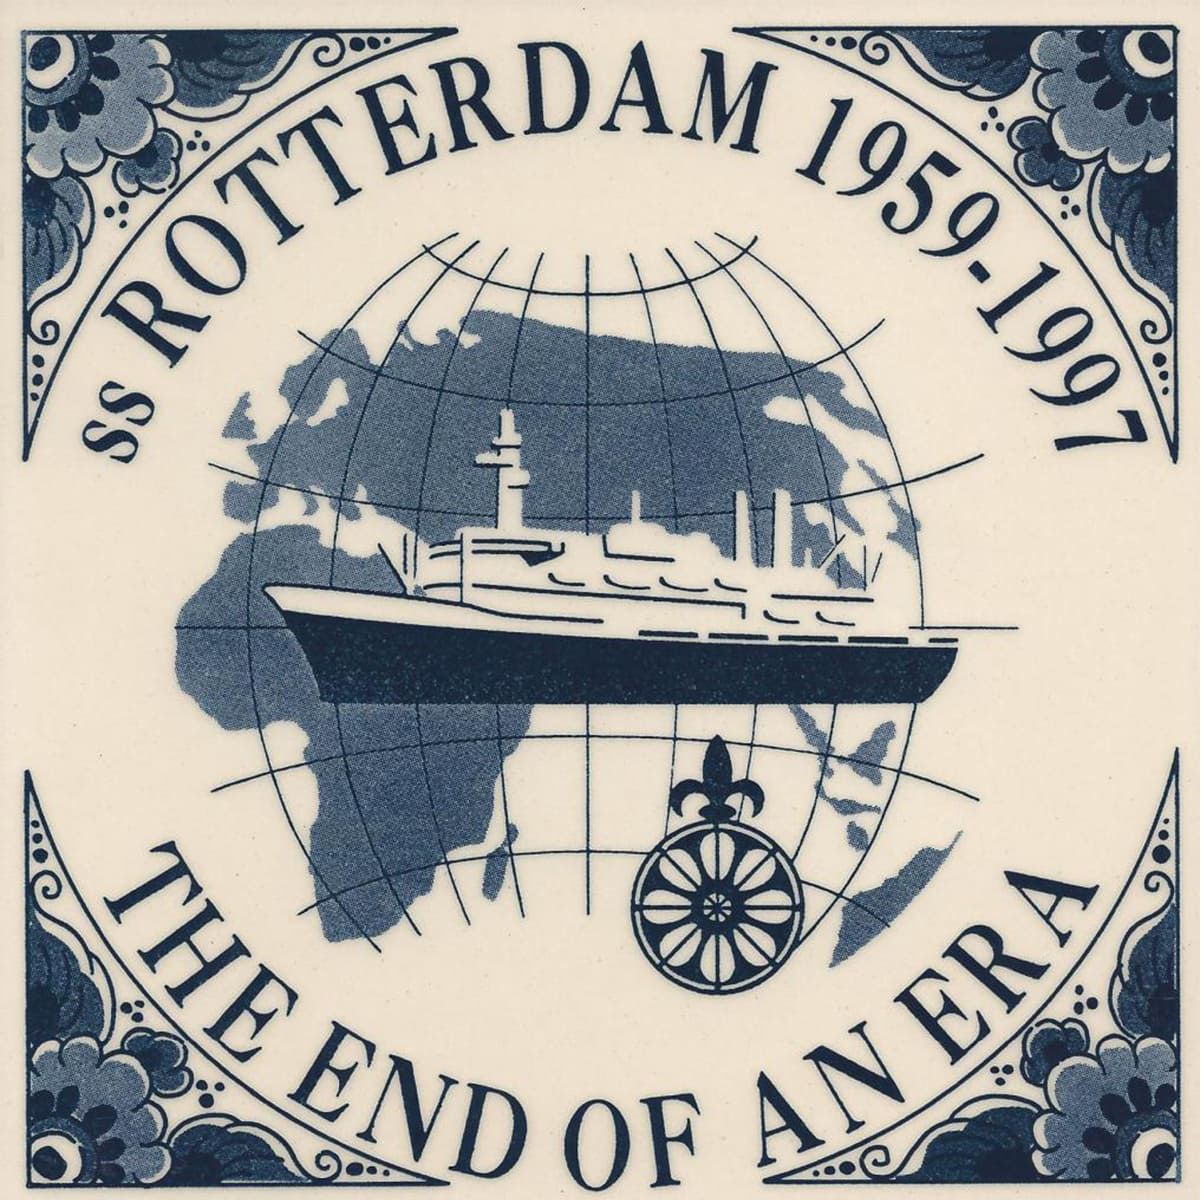 Rotterdam 1959-1997 The End of an Era commemorative tile, Holland America Line, 1997